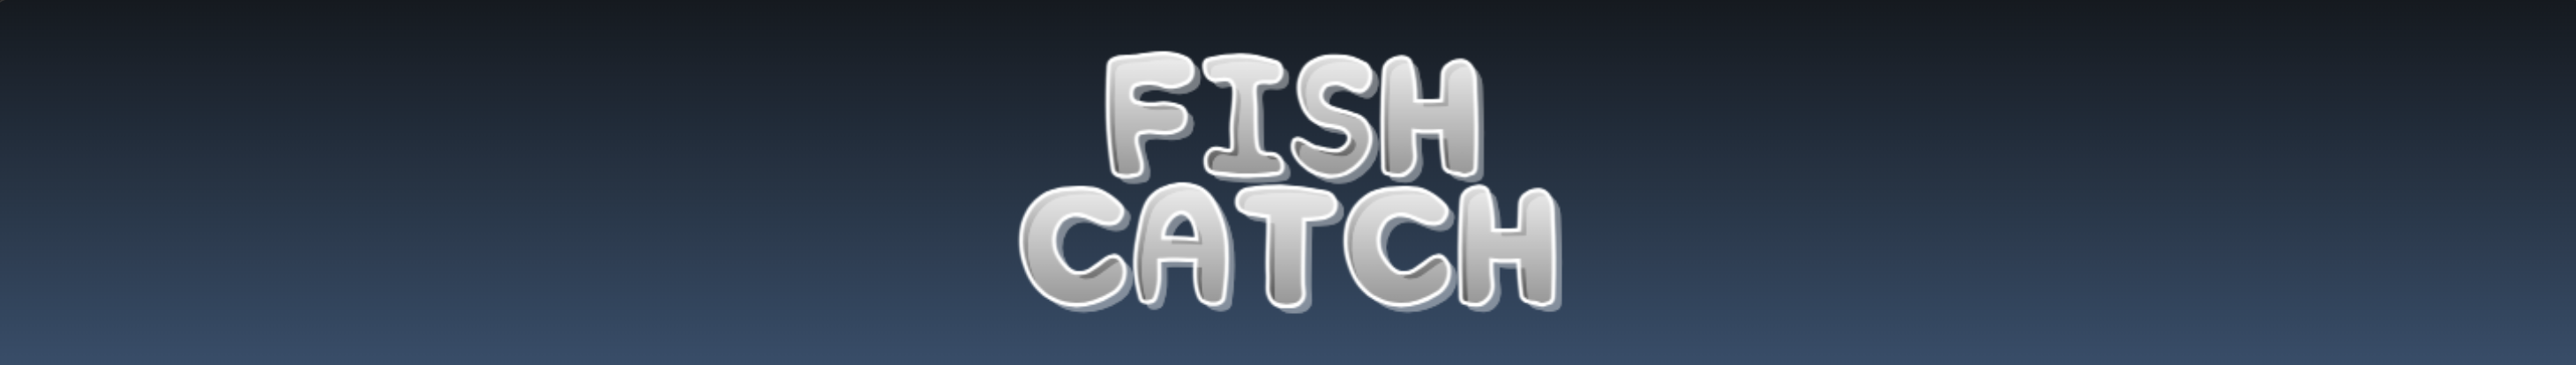 Fish Catch - Mobile